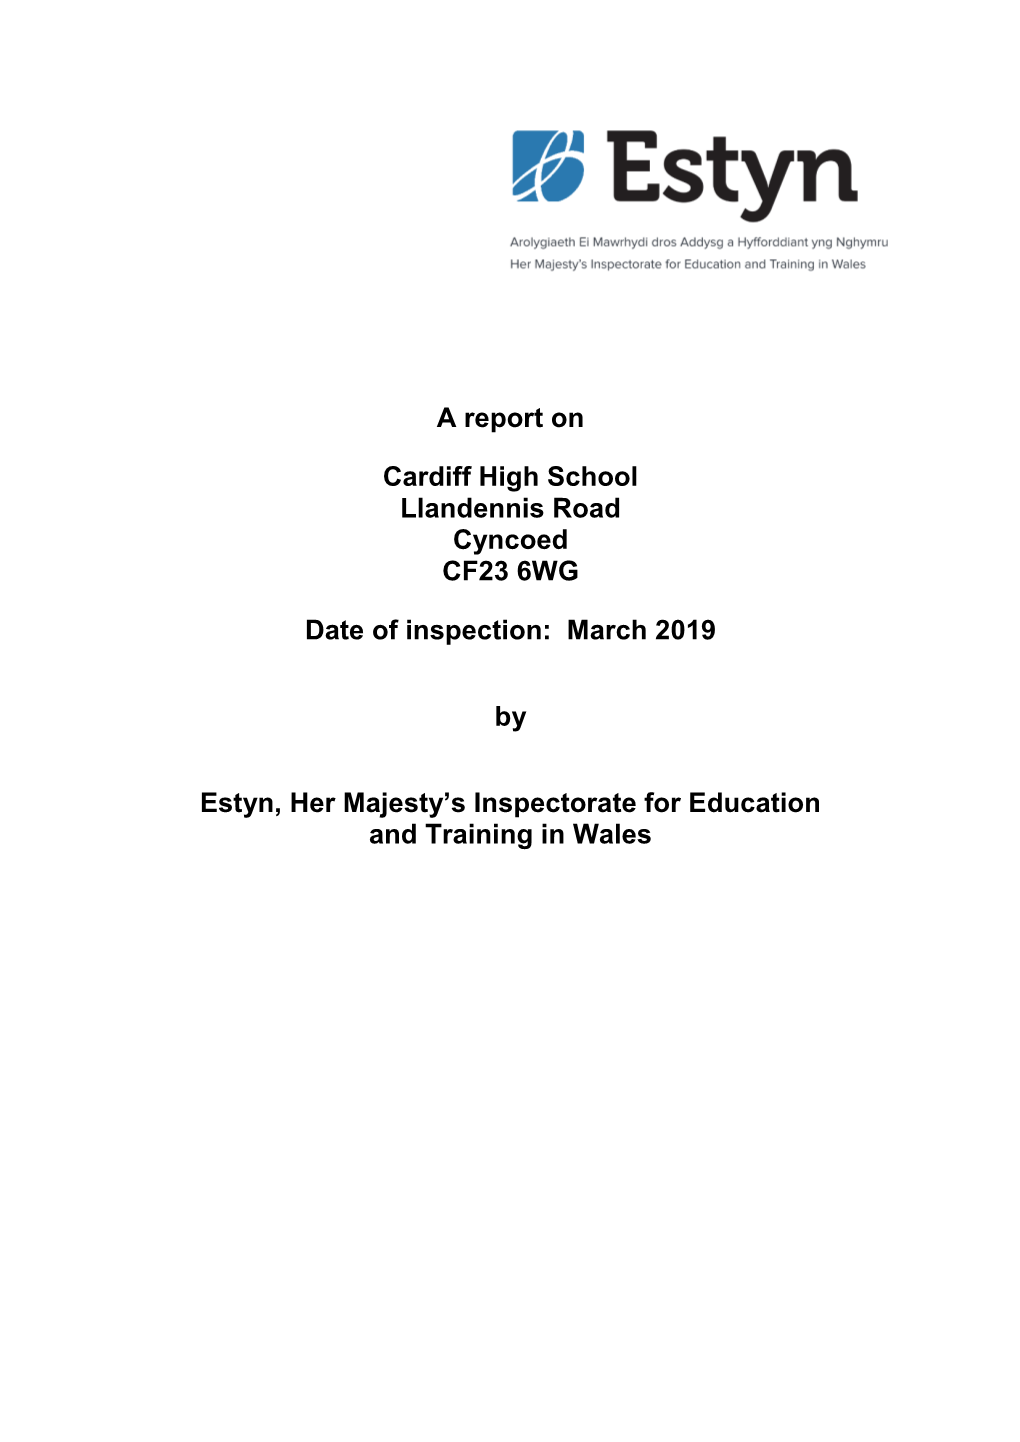 Cardiff High School Inspection Report 2019 PDF File